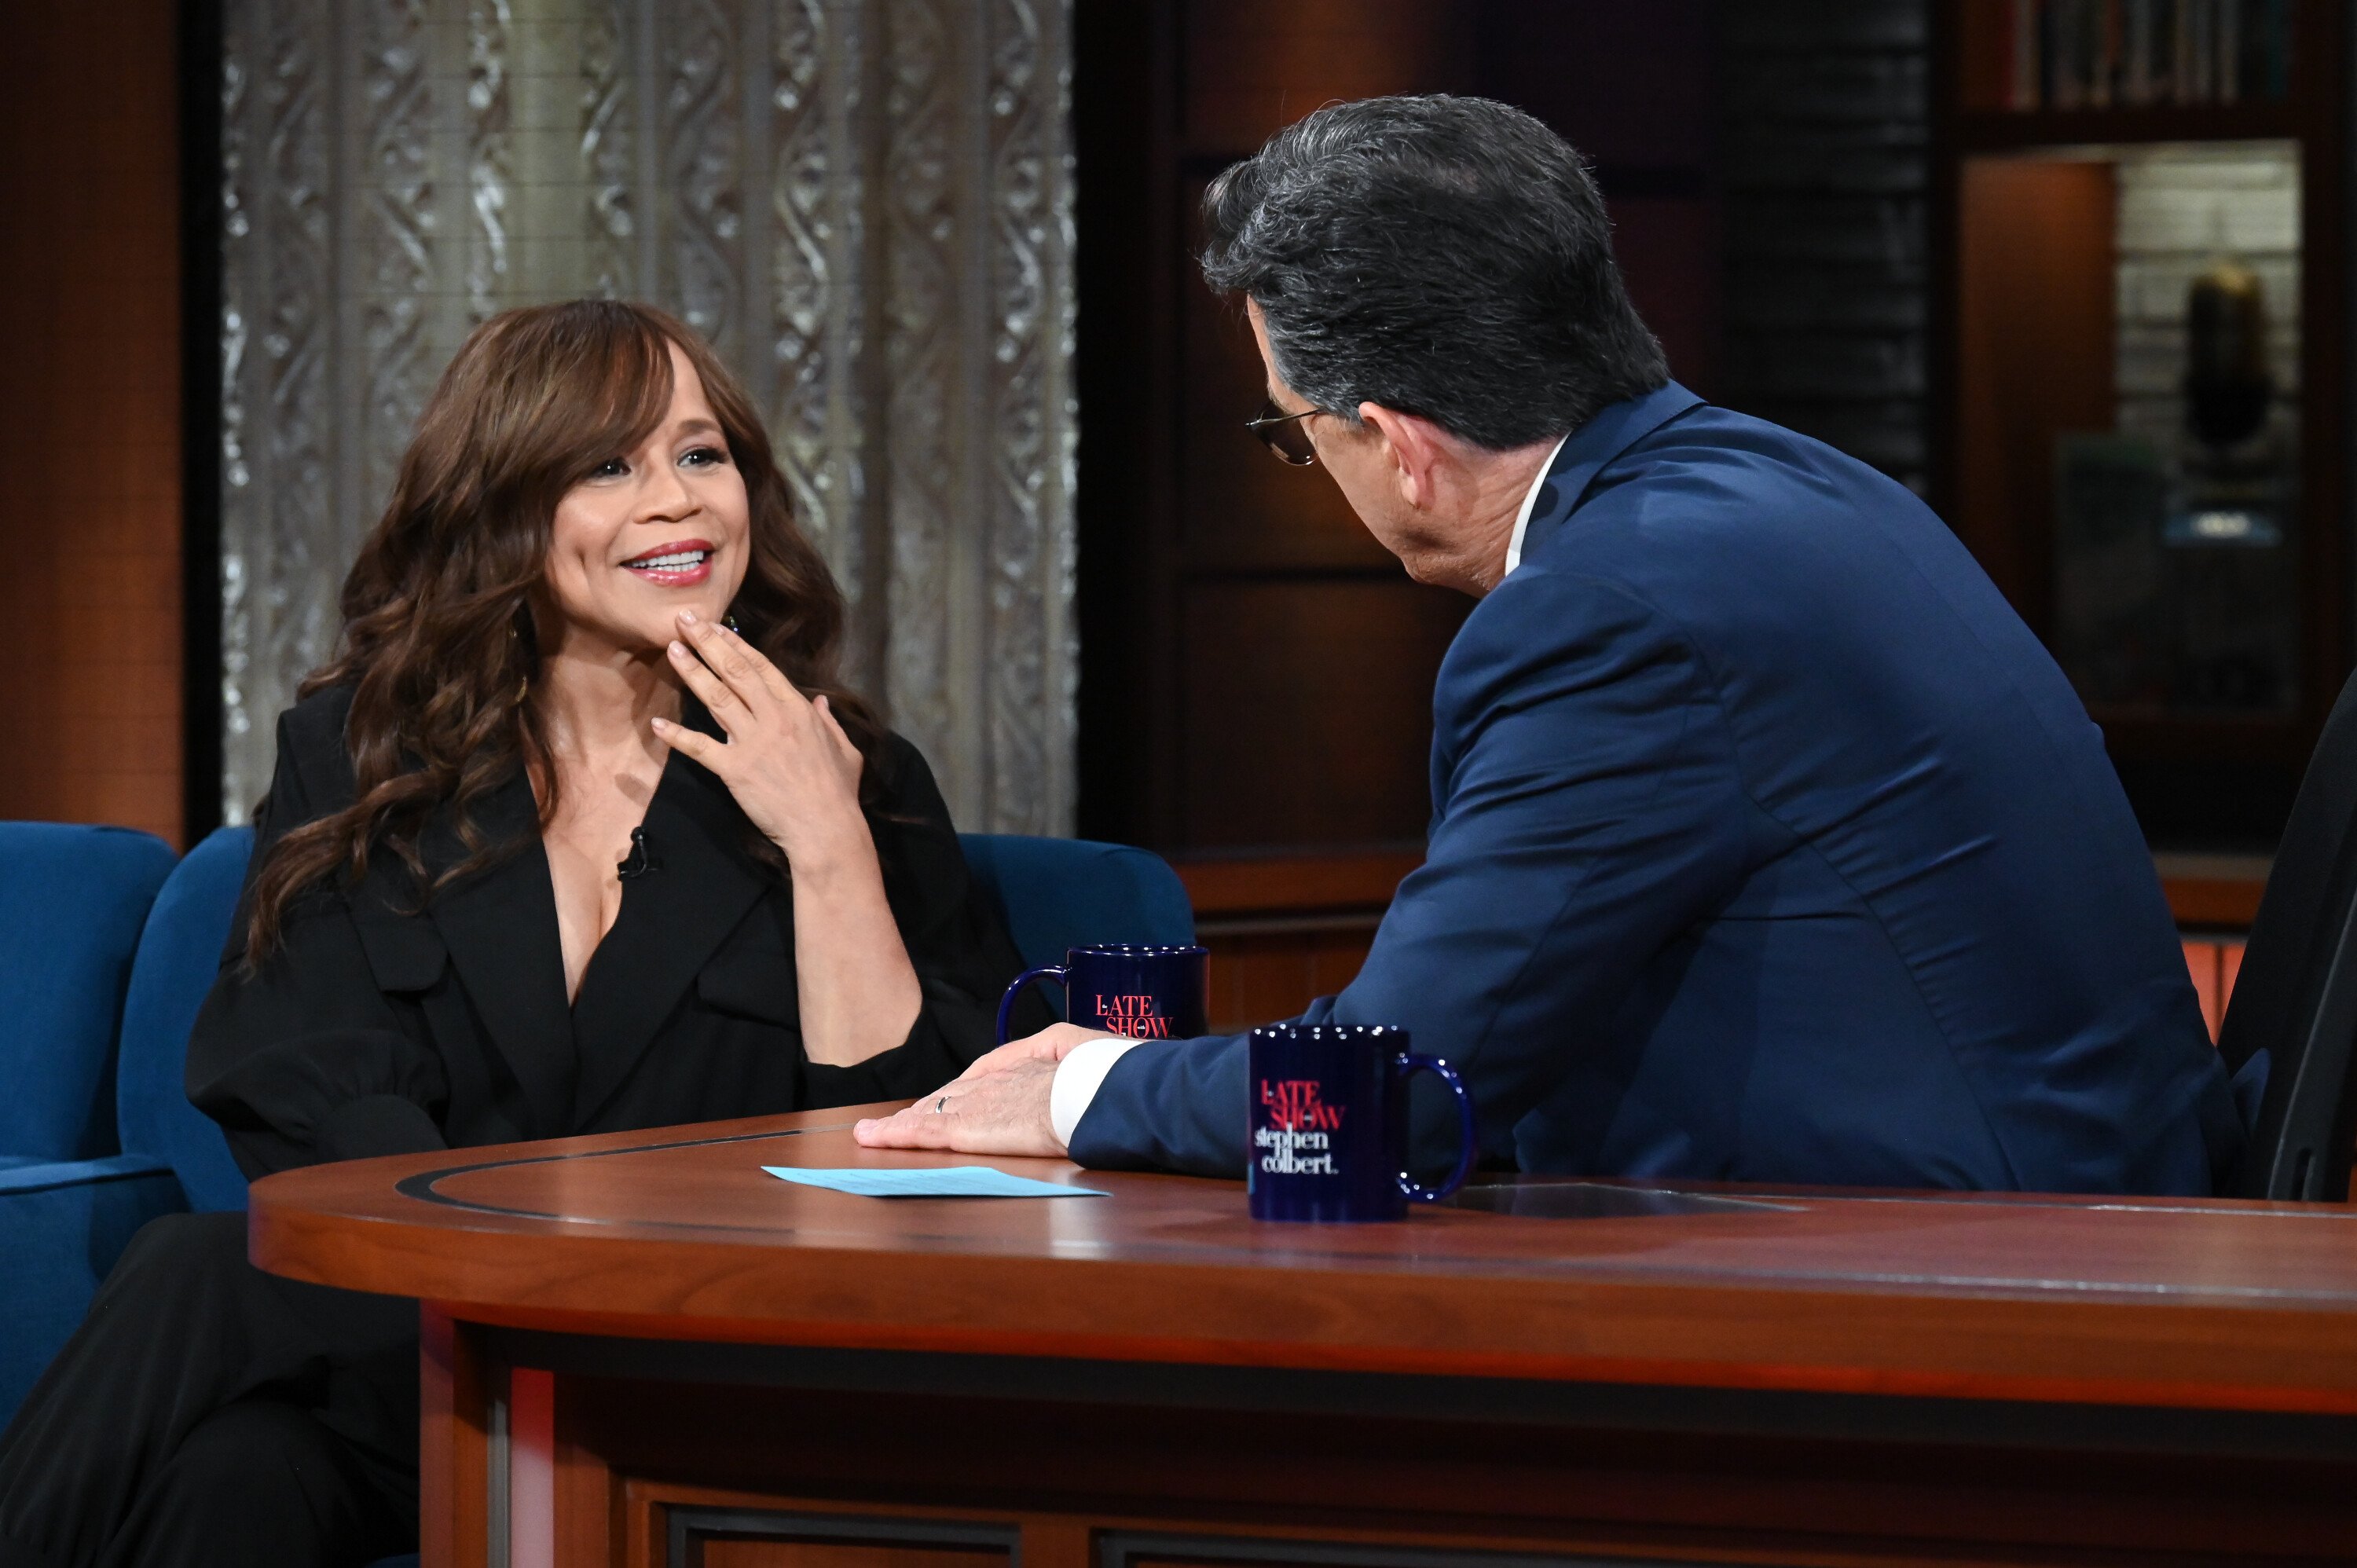 Rosie Perez as a guest on The Late Show with Stephen Colbert on June 7, 2022. | Source: Getty Images 